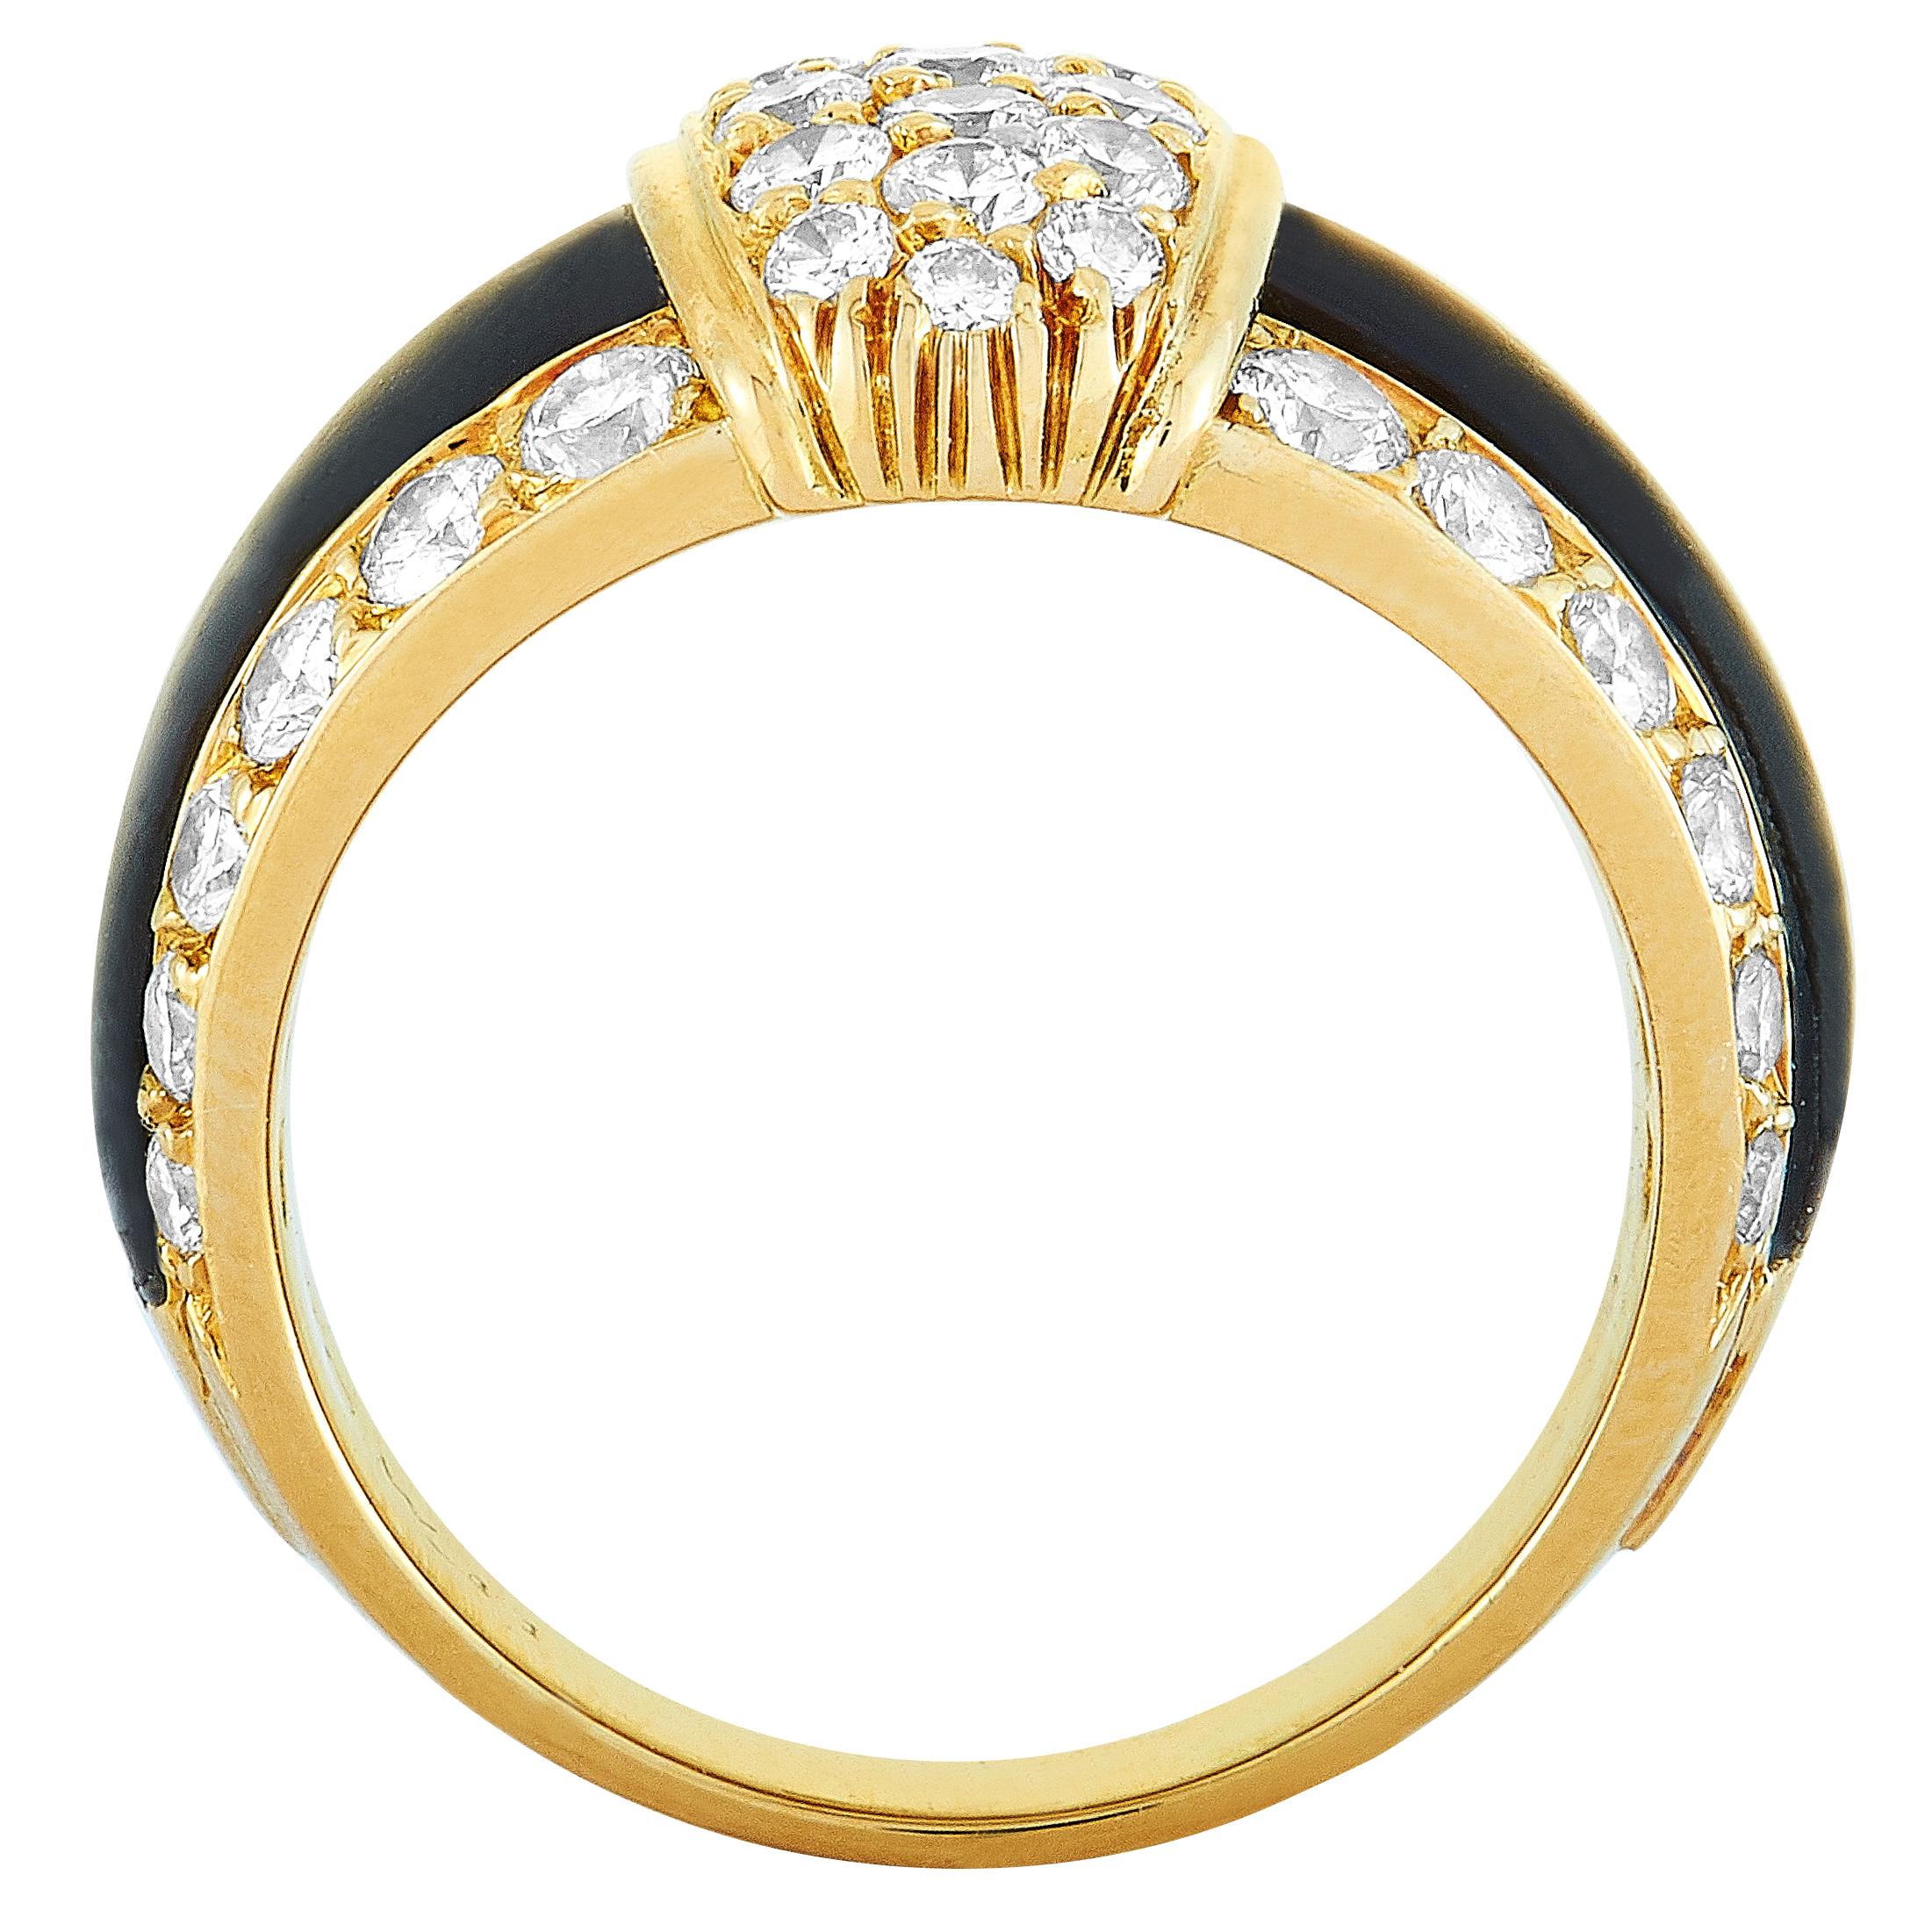 This Van Cleef & Arpels ring is made of 18K yellow gold and embellished with onyx and diamonds. The ring weighs 9.4 grams, boasting band thickness of 4 mm and top height of 4 mm, while top dimensions measure 20 by 14 mm.

Offered in estate